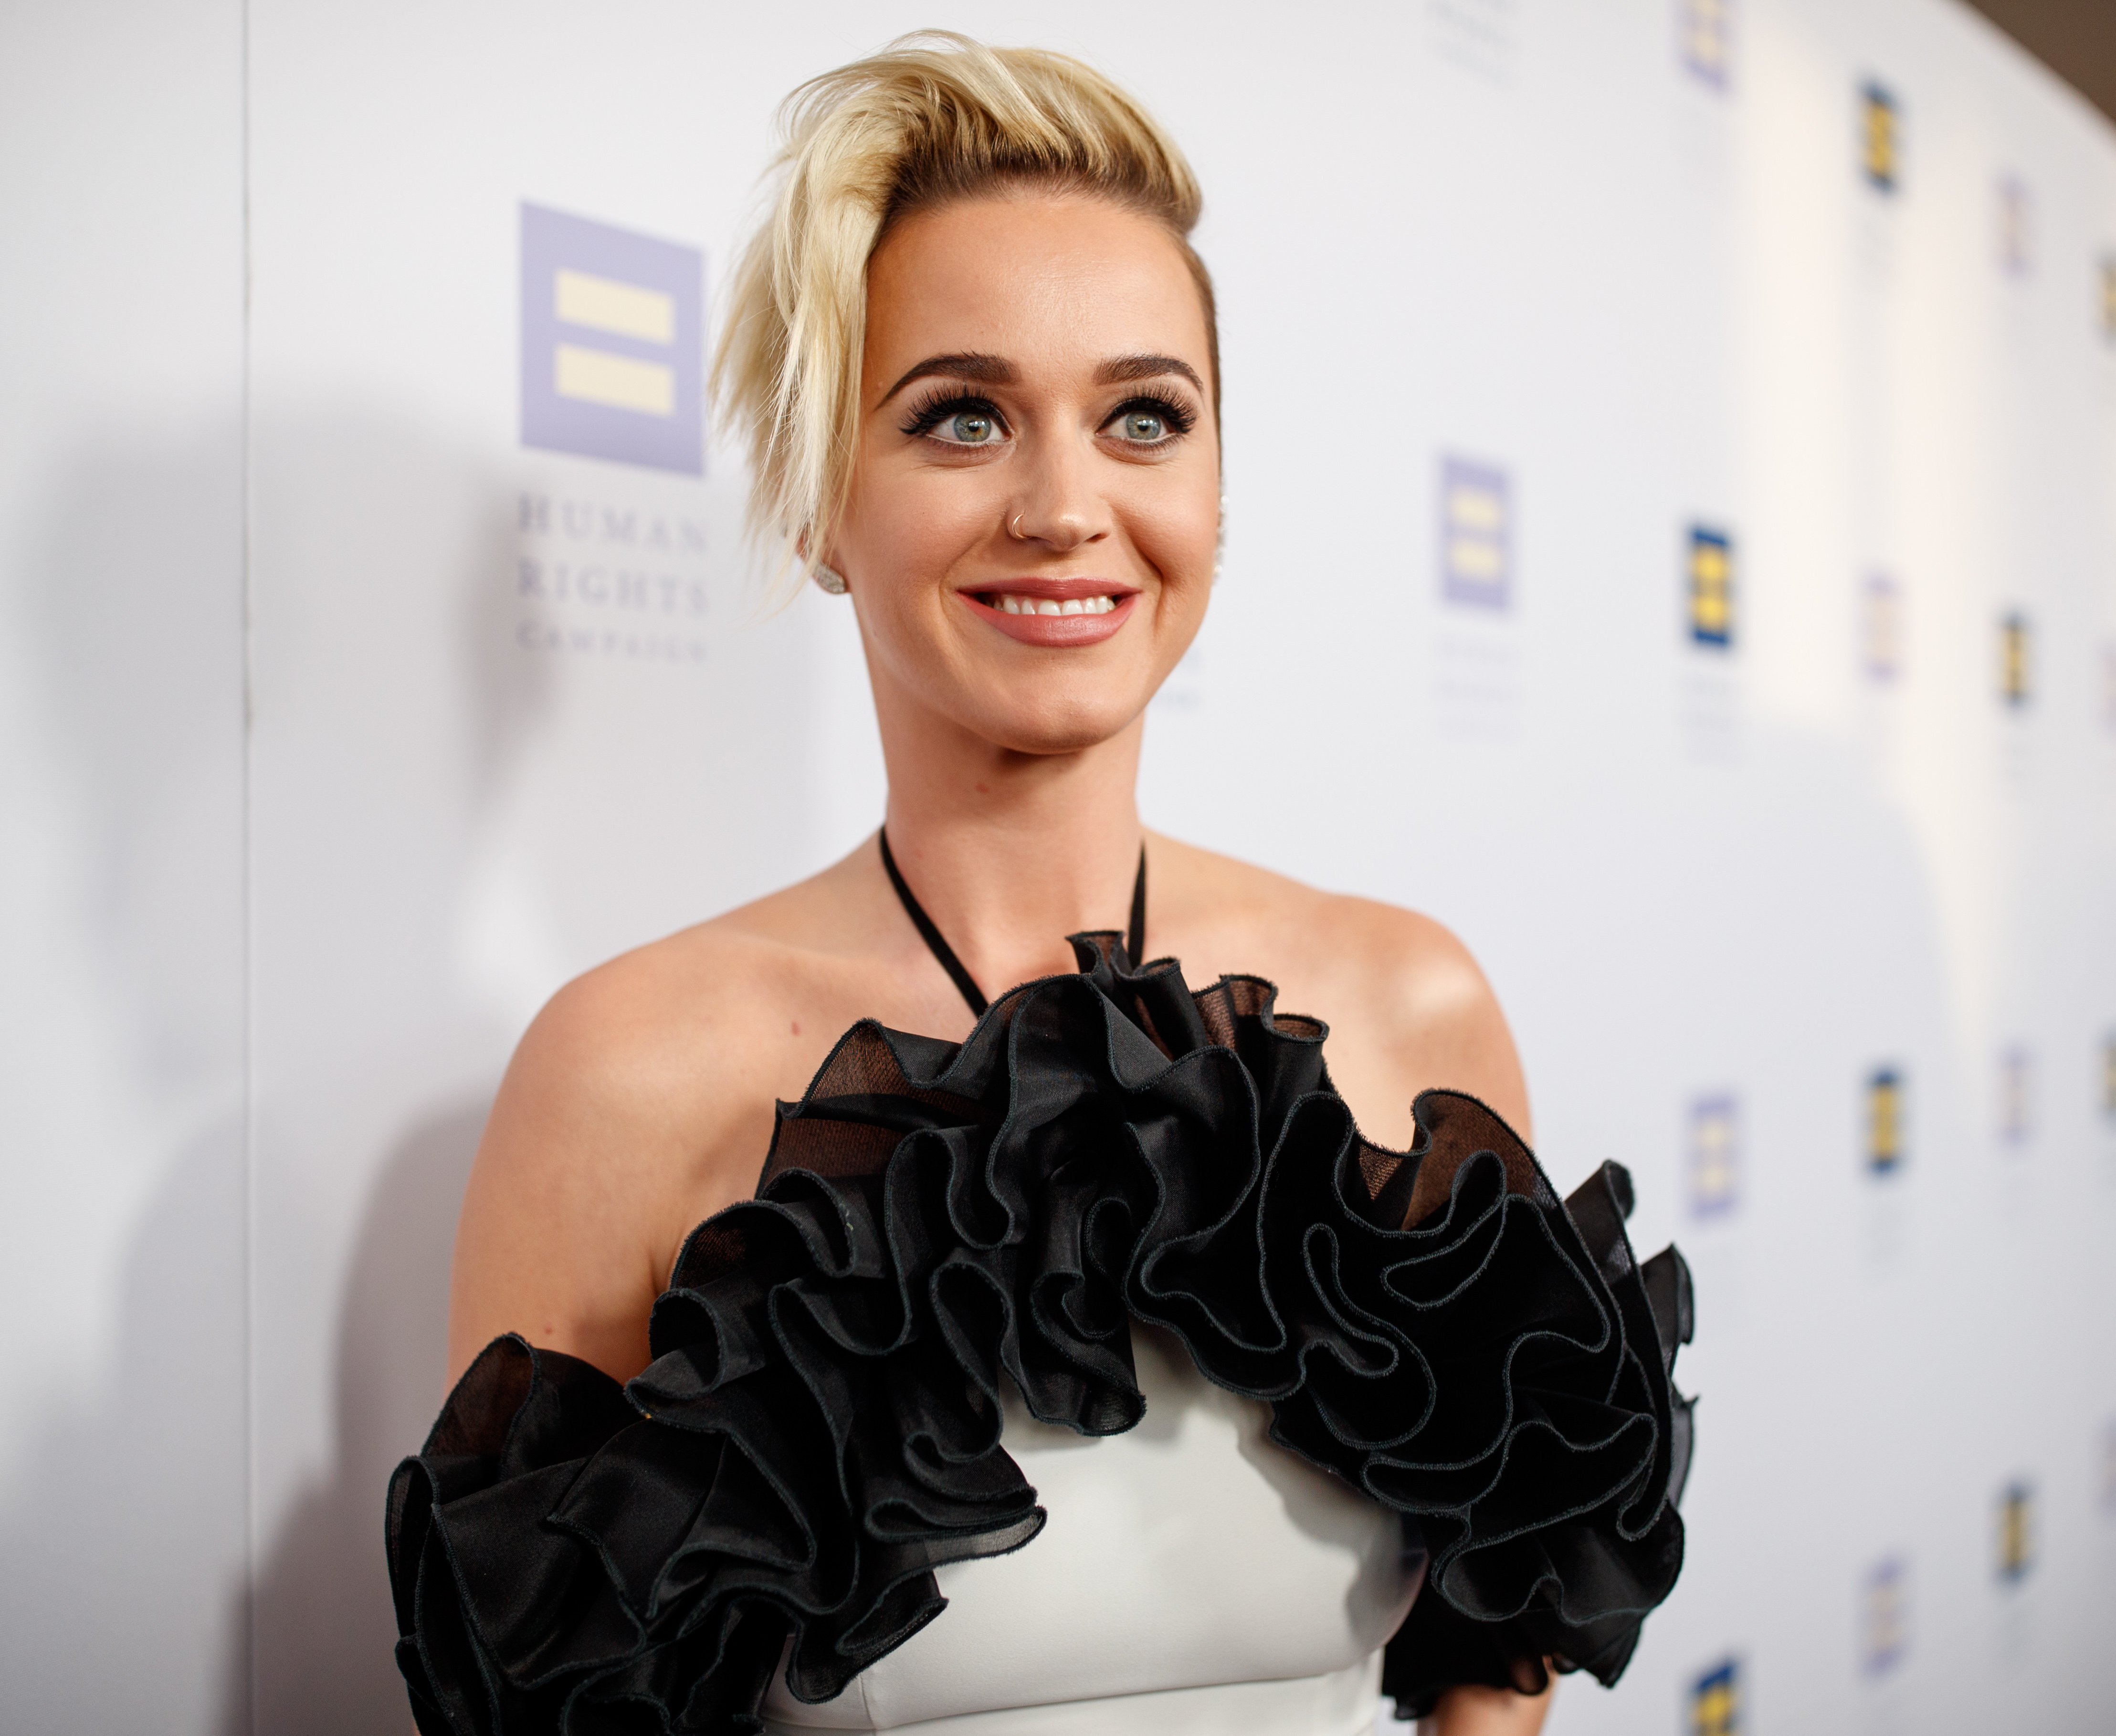 Katy Perry during the 2017 Human Rights Gala. | Photo: Getty Images